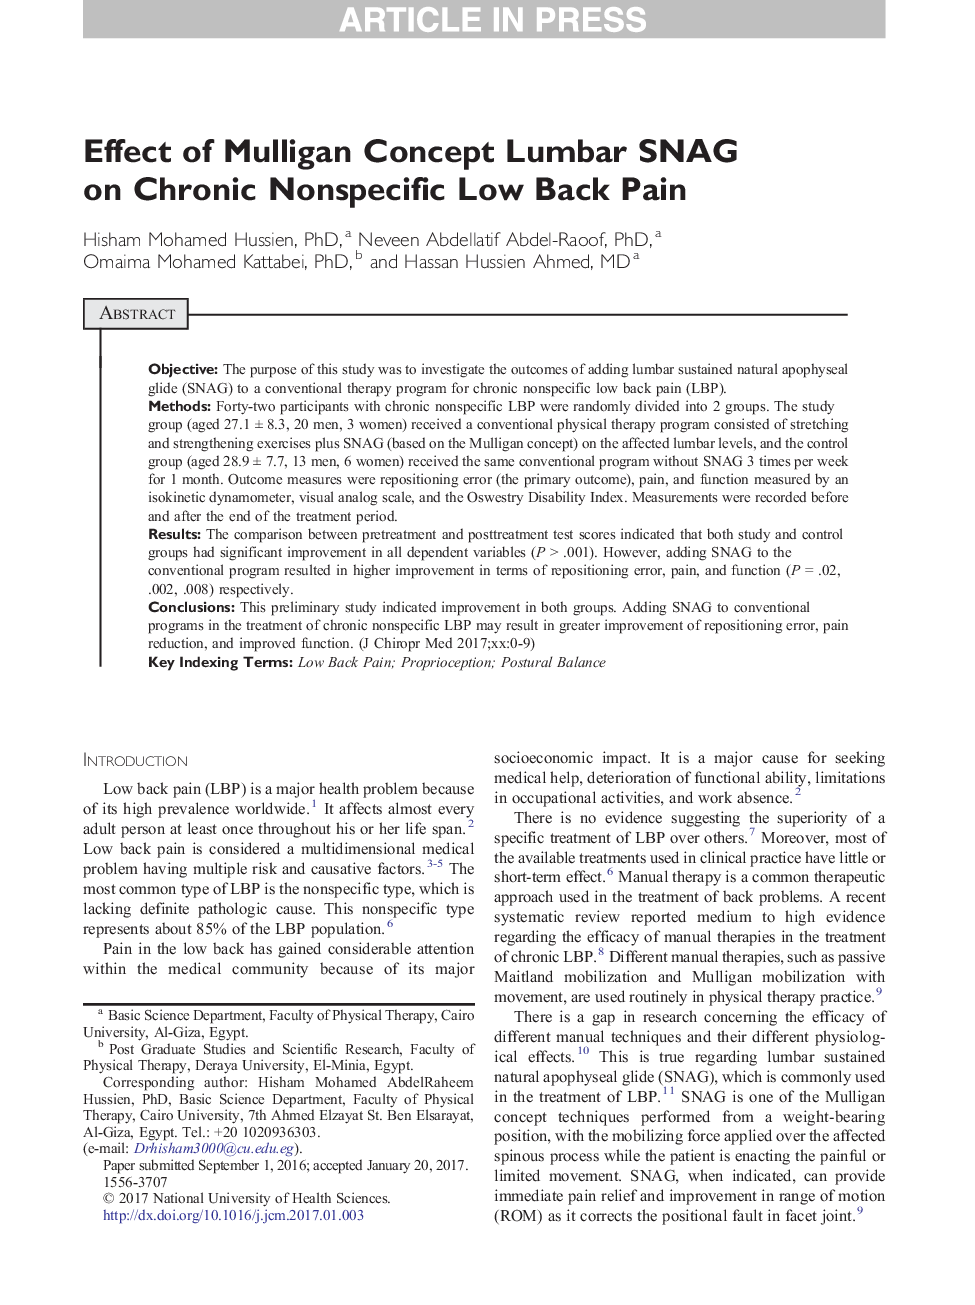 Effect of Mulligan Concept Lumbar SNAG on Chronic Nonspecific Low Back Pain